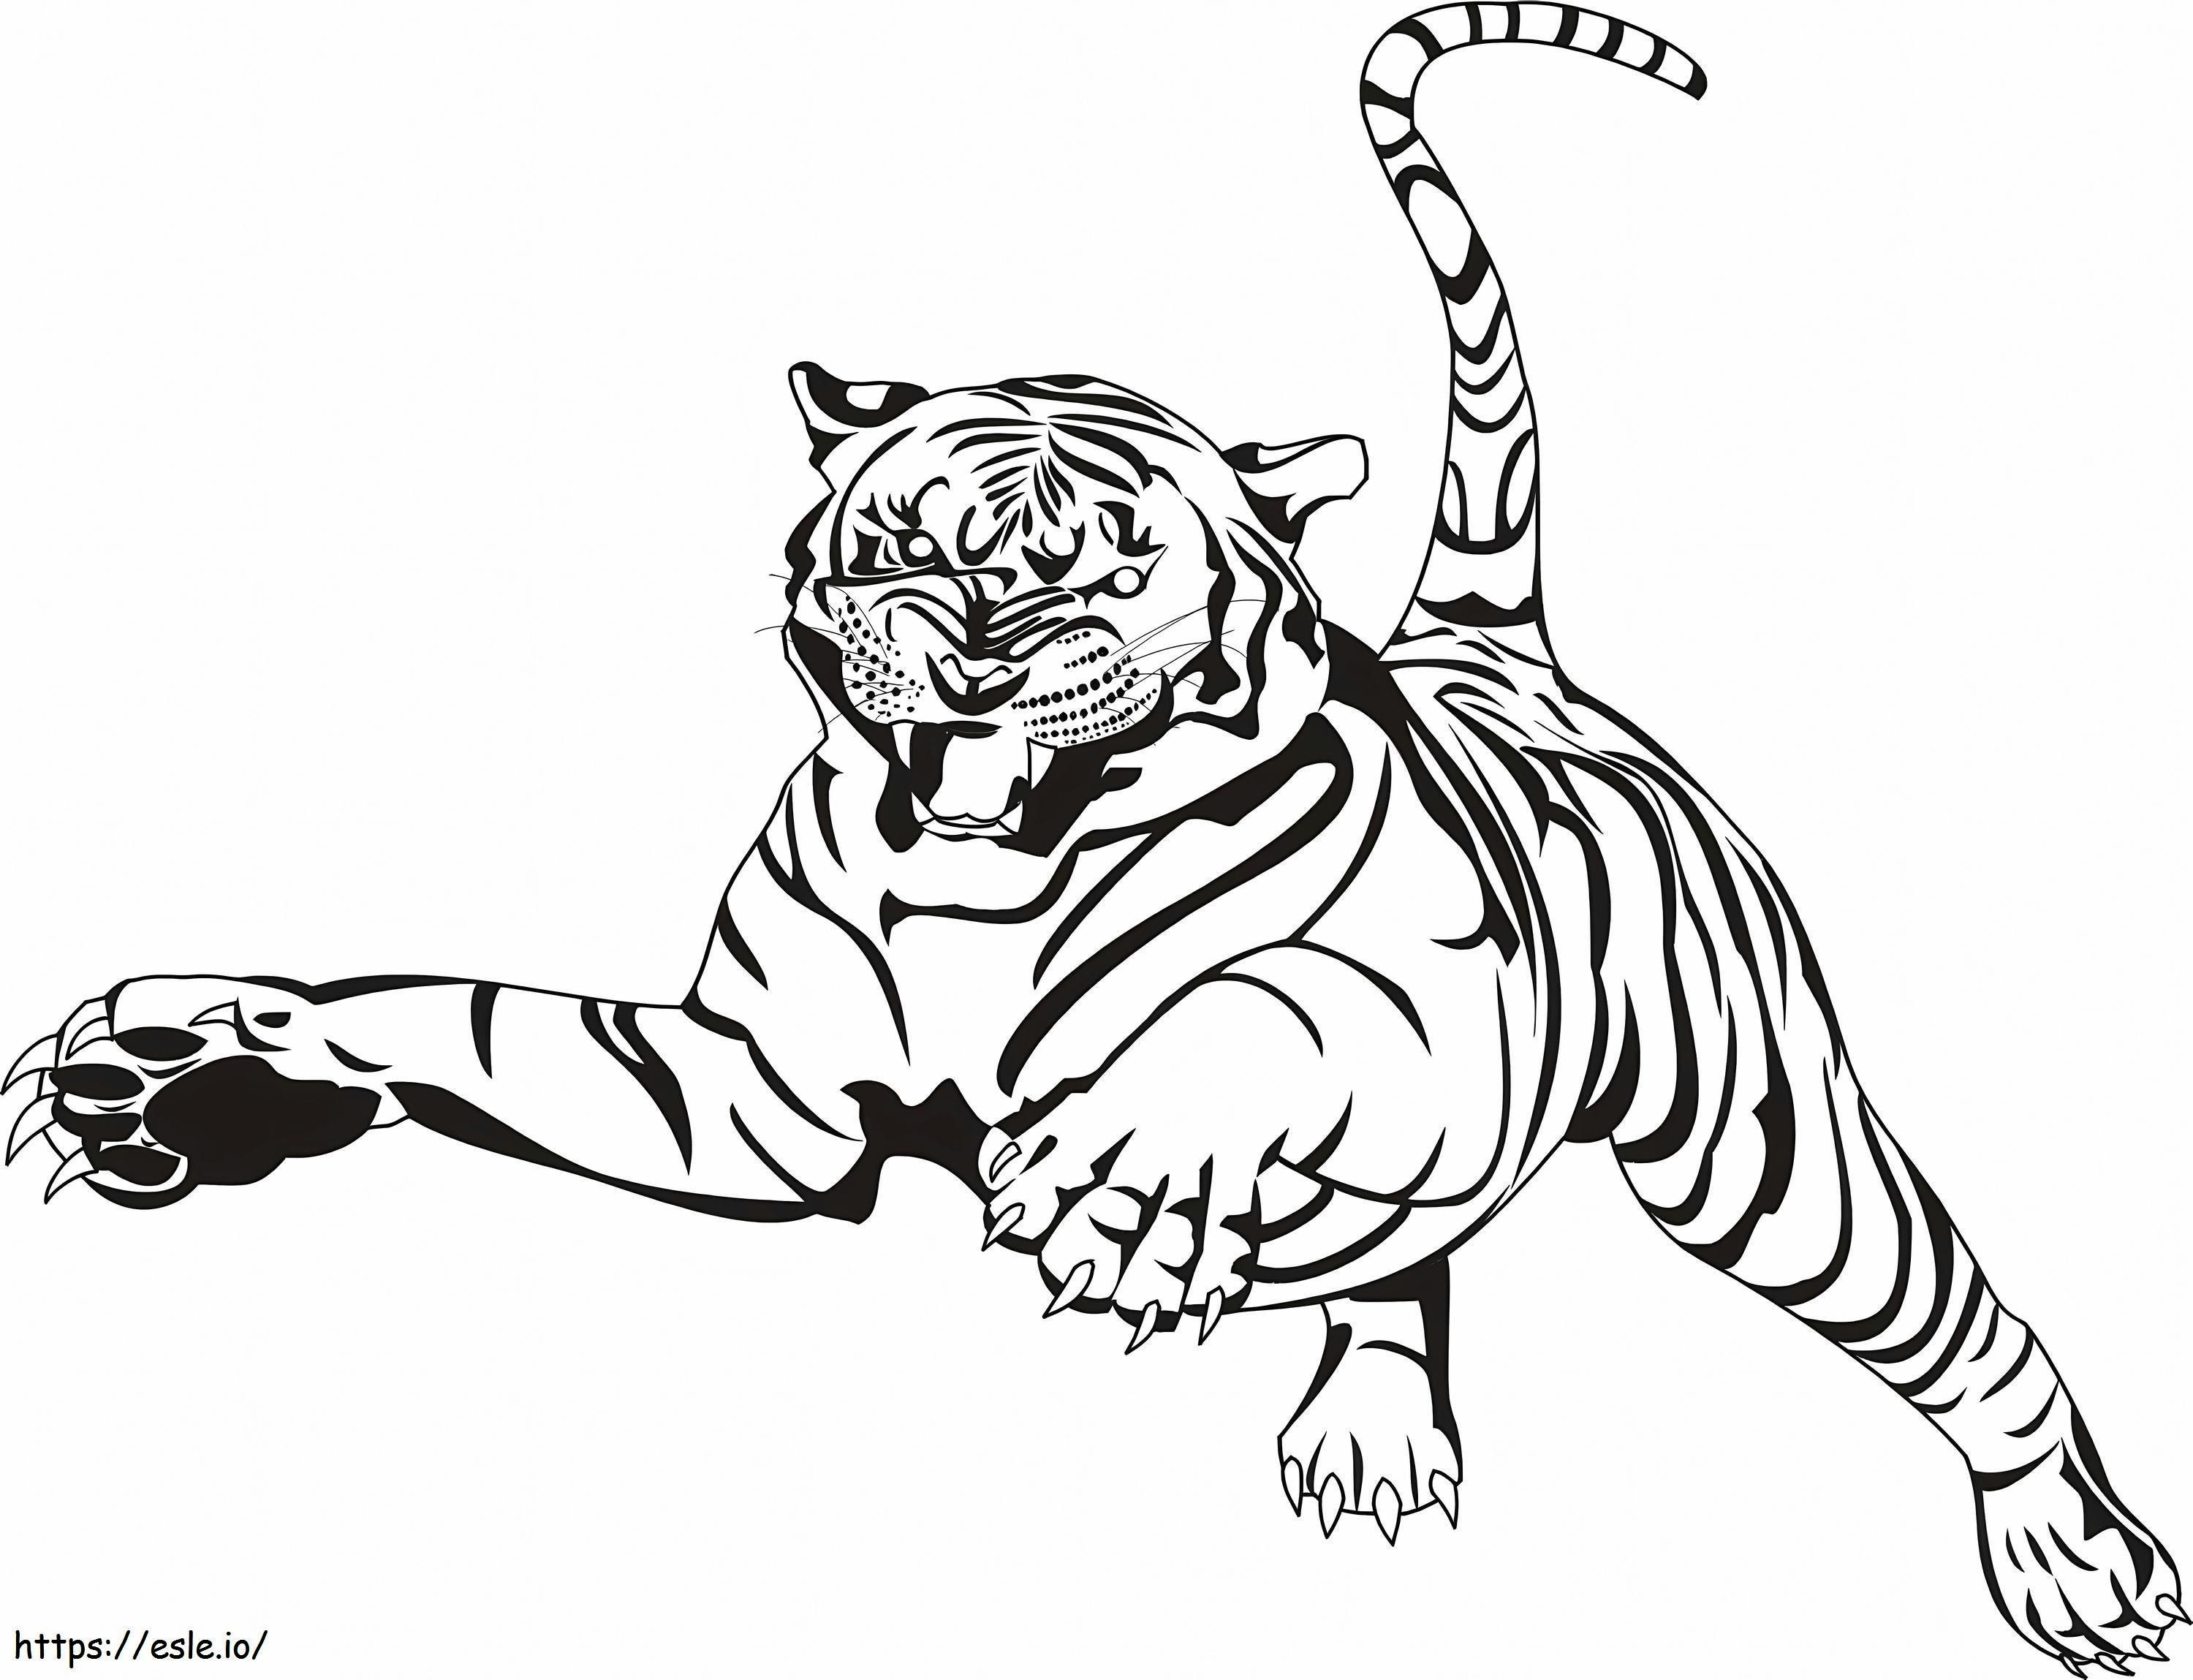 Tiger Attack coloring page